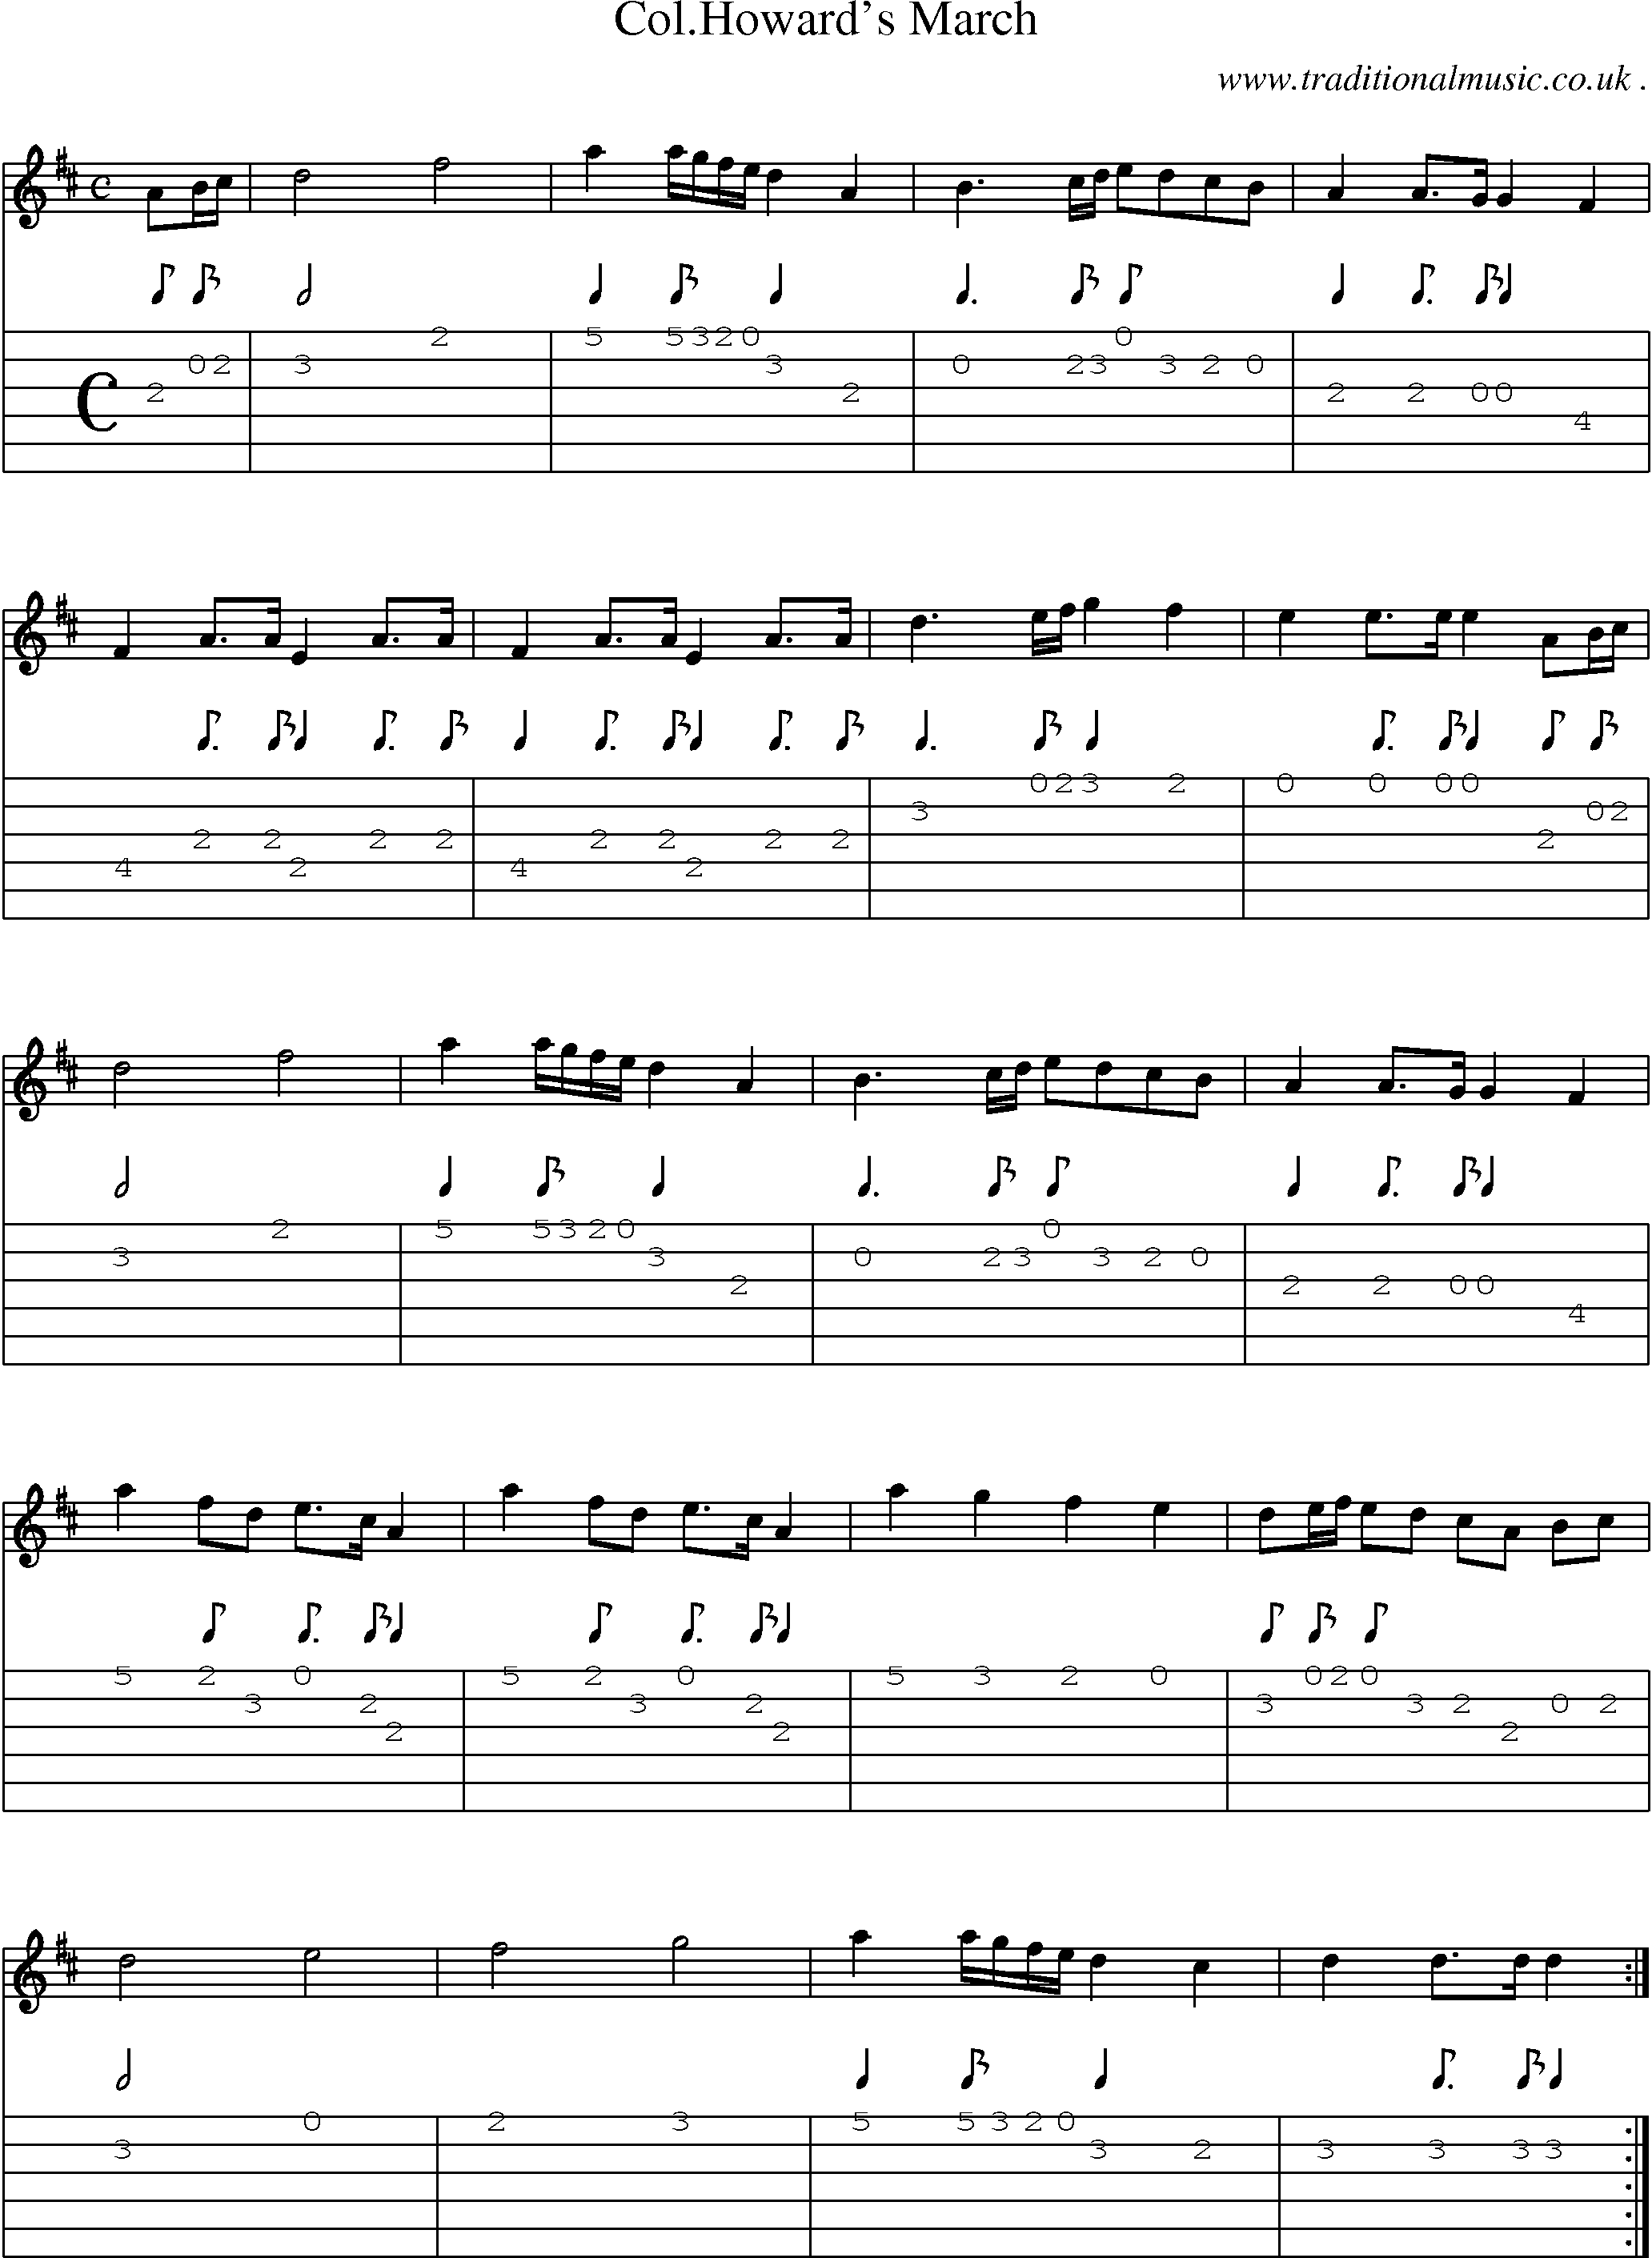 Sheet-Music and Guitar Tabs for Colhowards March